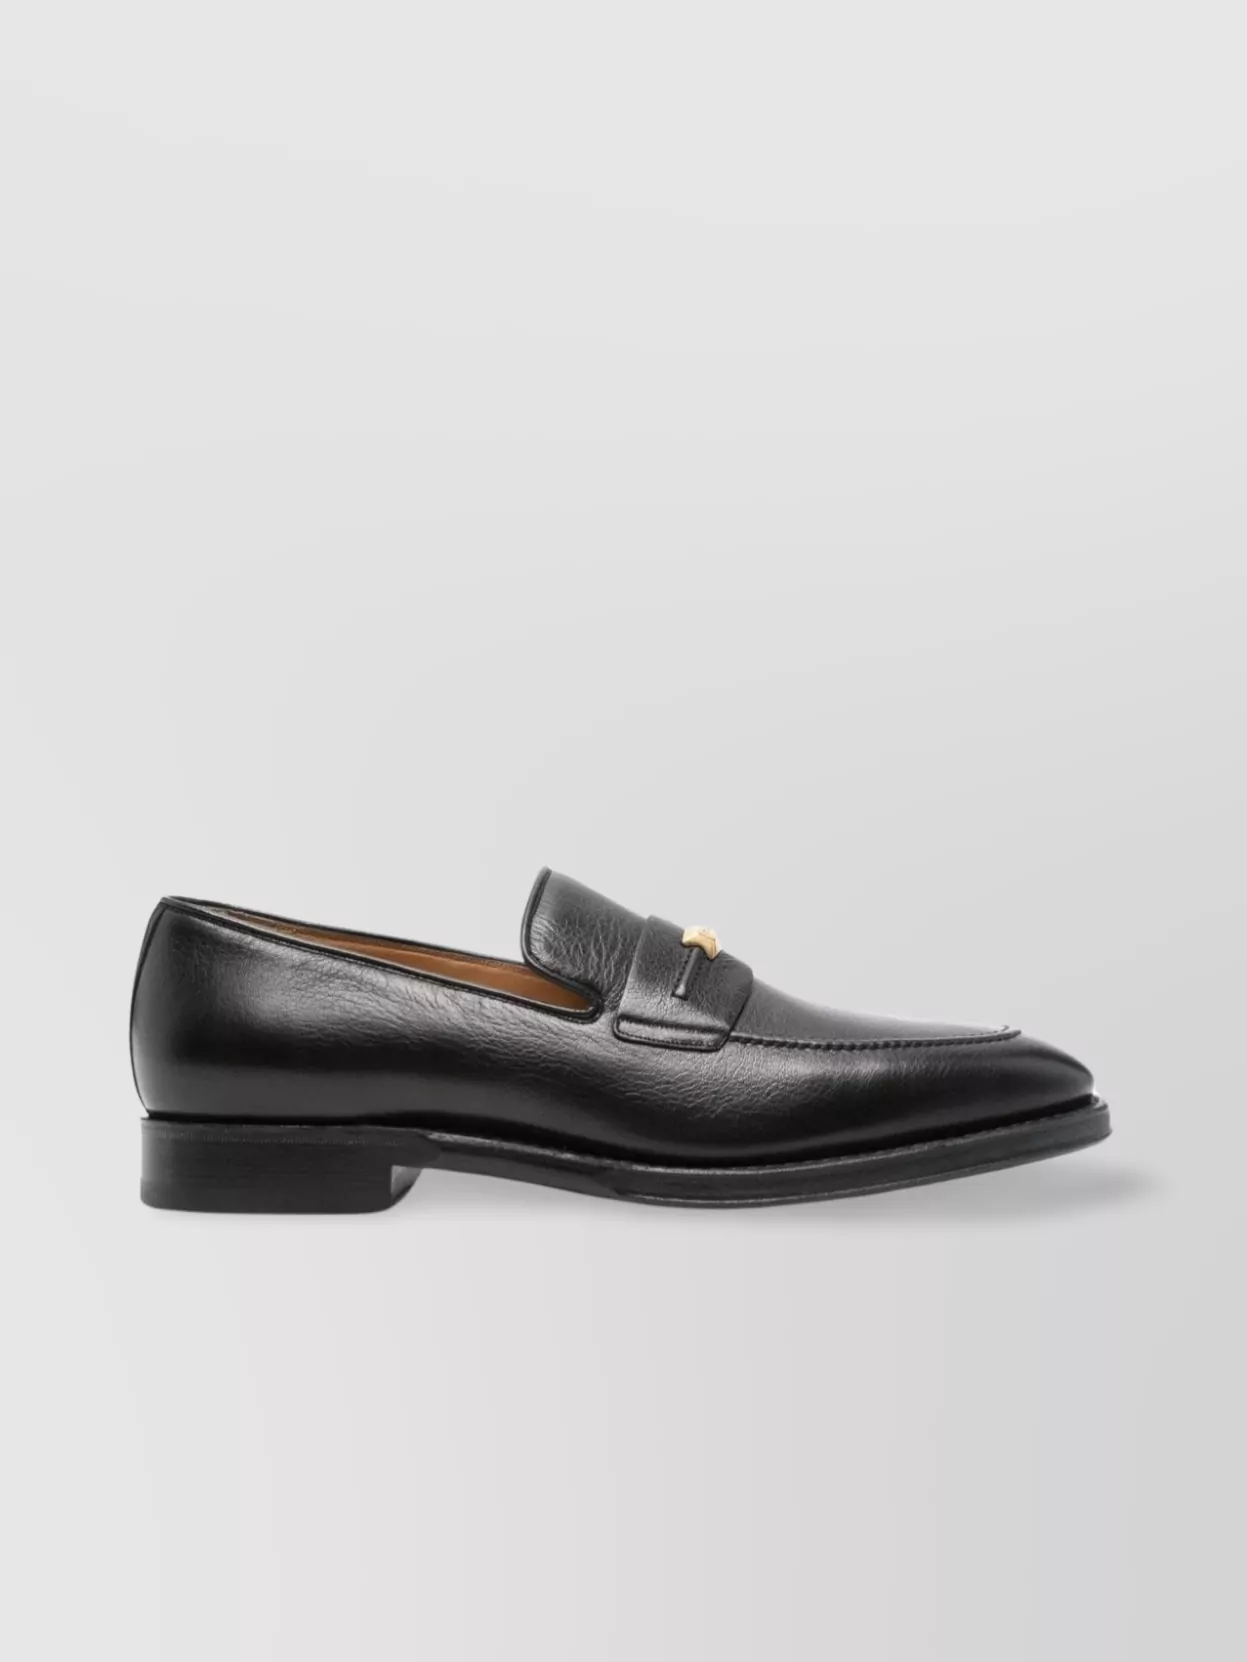 Shop Bally Loafers Featuring Apron Toe And Strap Detailing